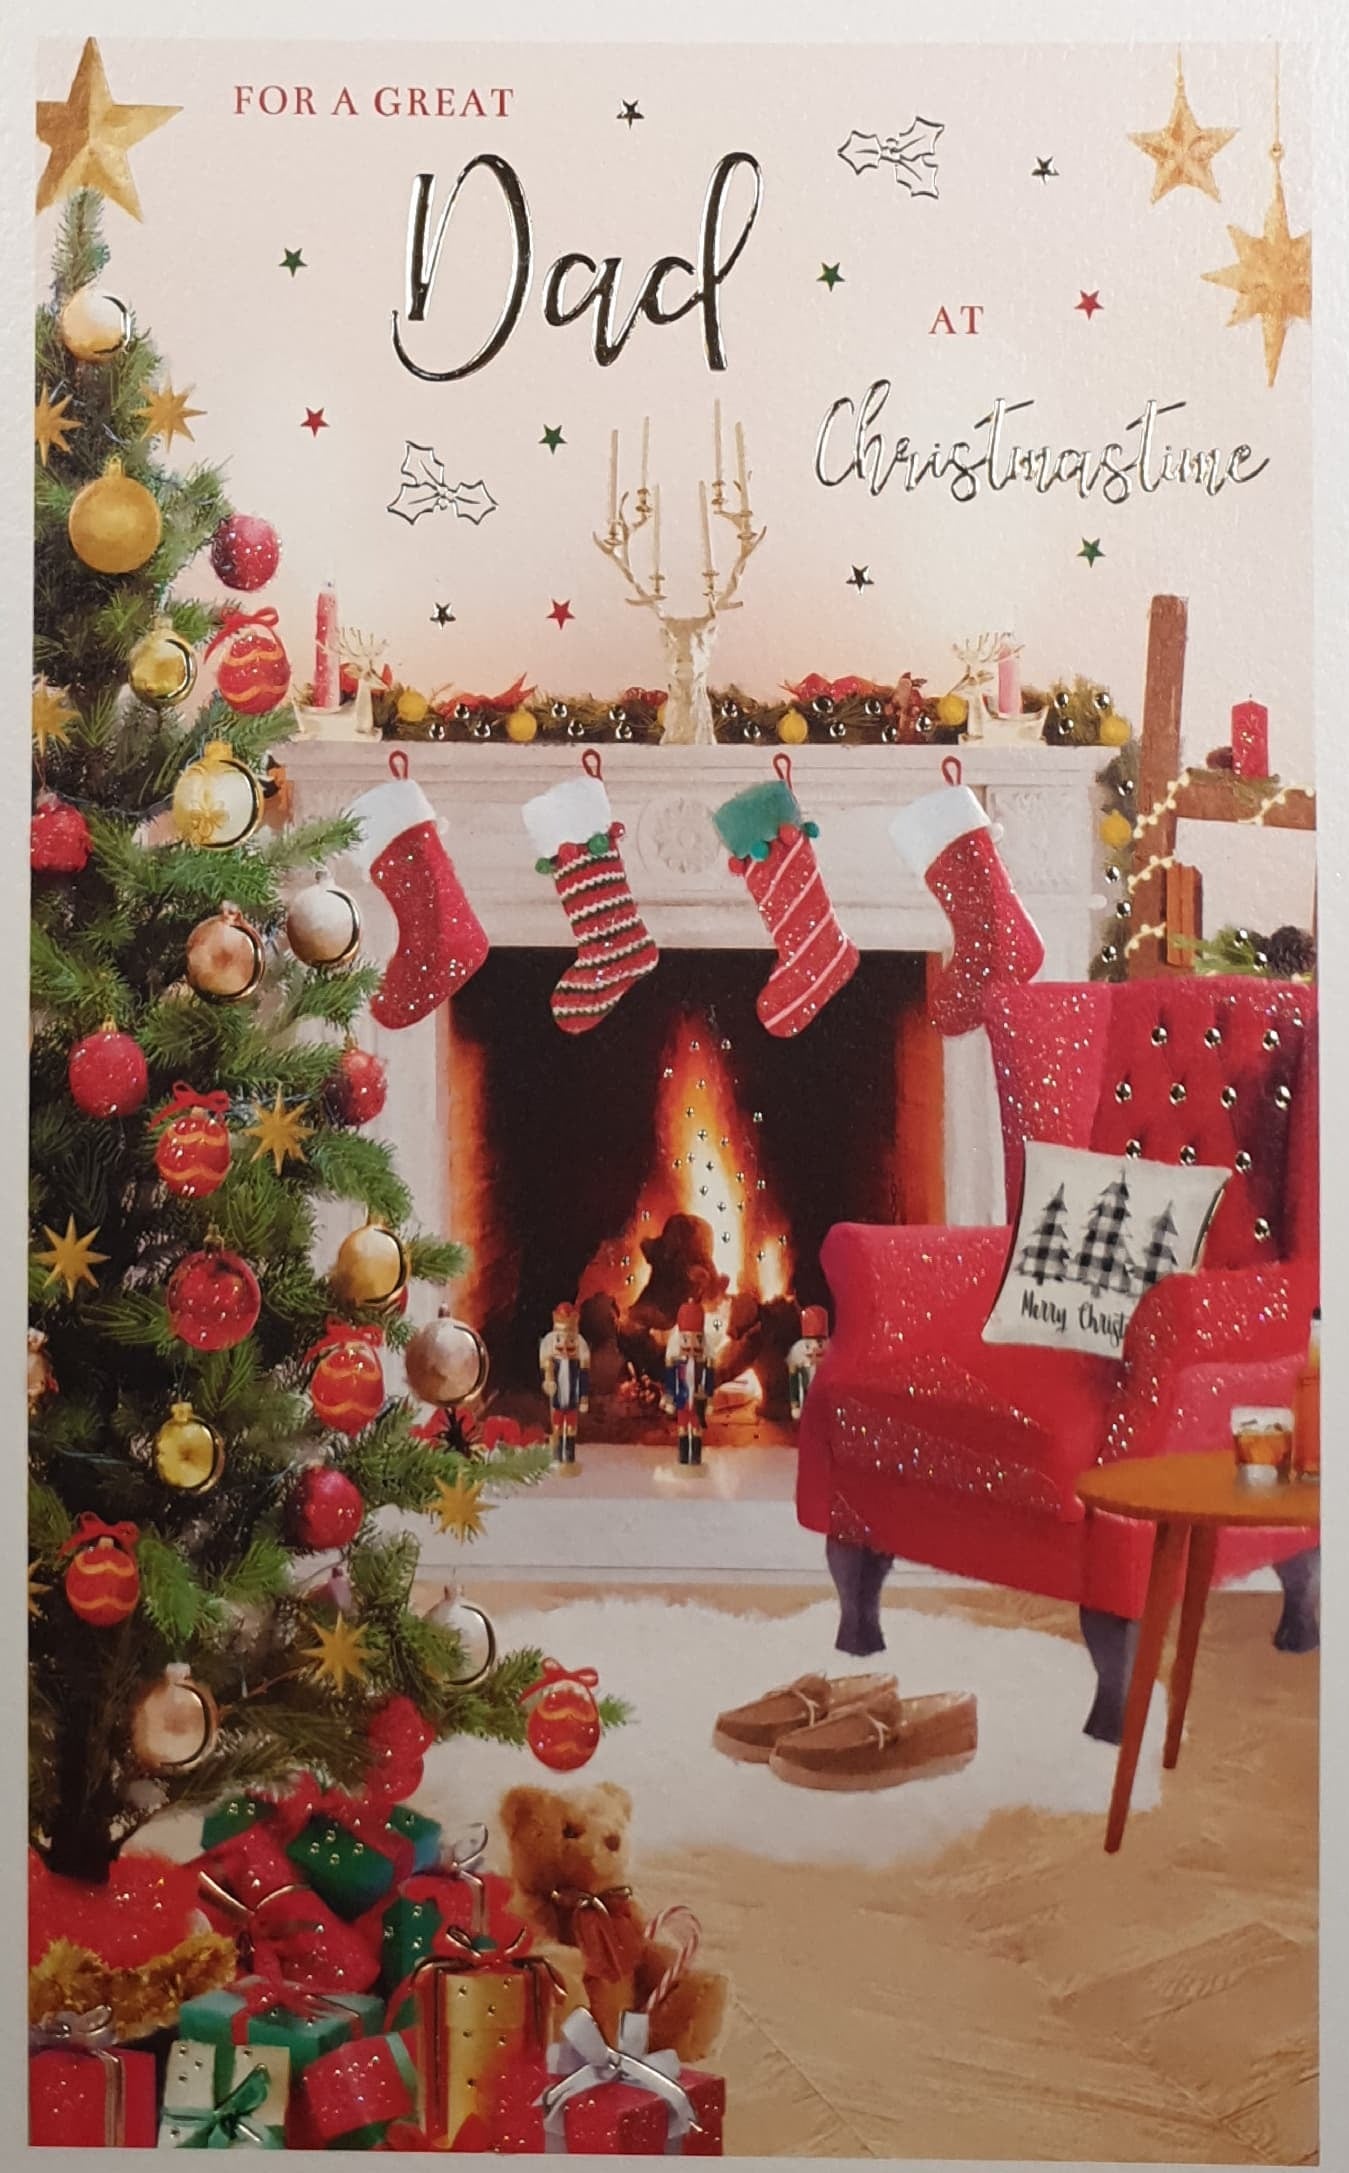 Dad Christmas Card - Stockings By the Fireplace & Armchair